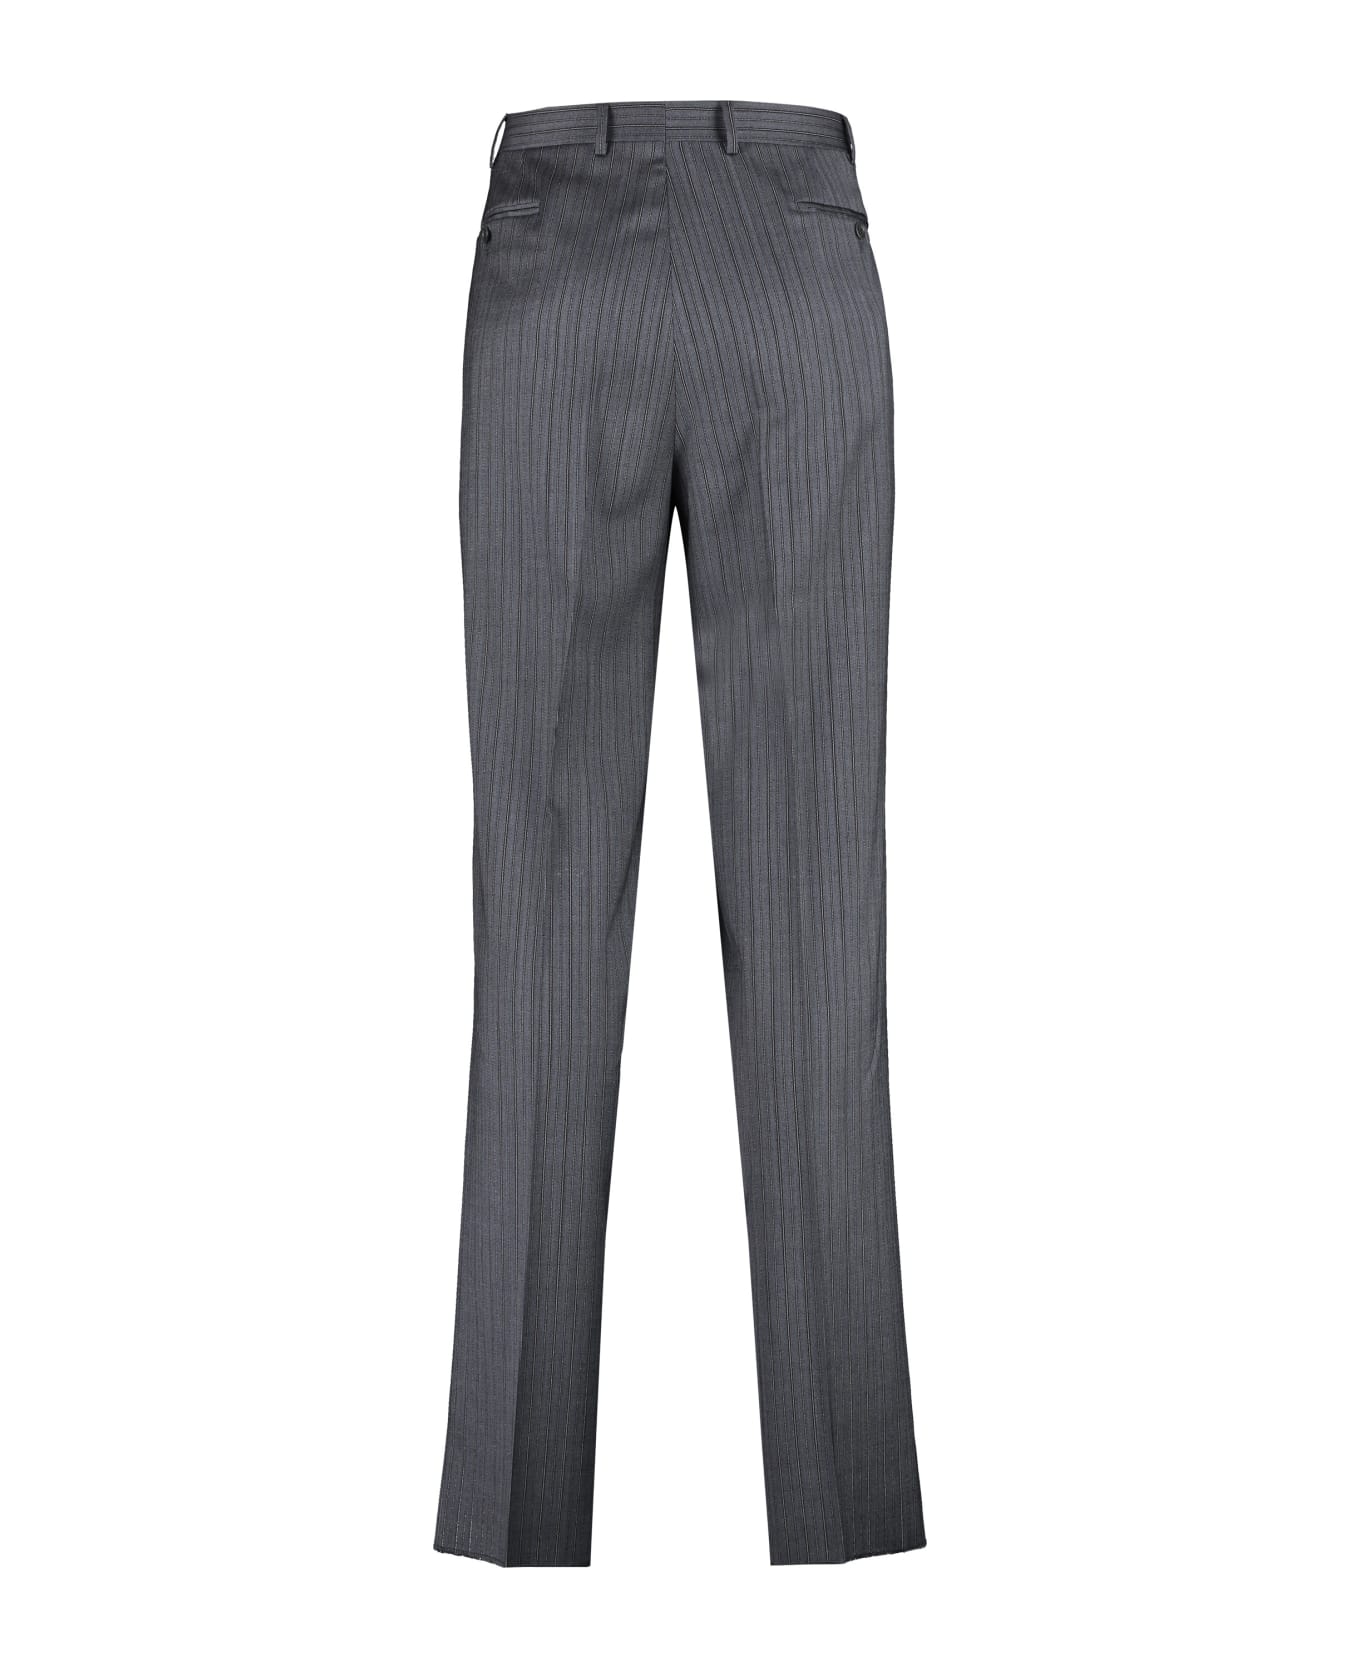 Canali Pin-striped Wool Tailored Trousers - grey